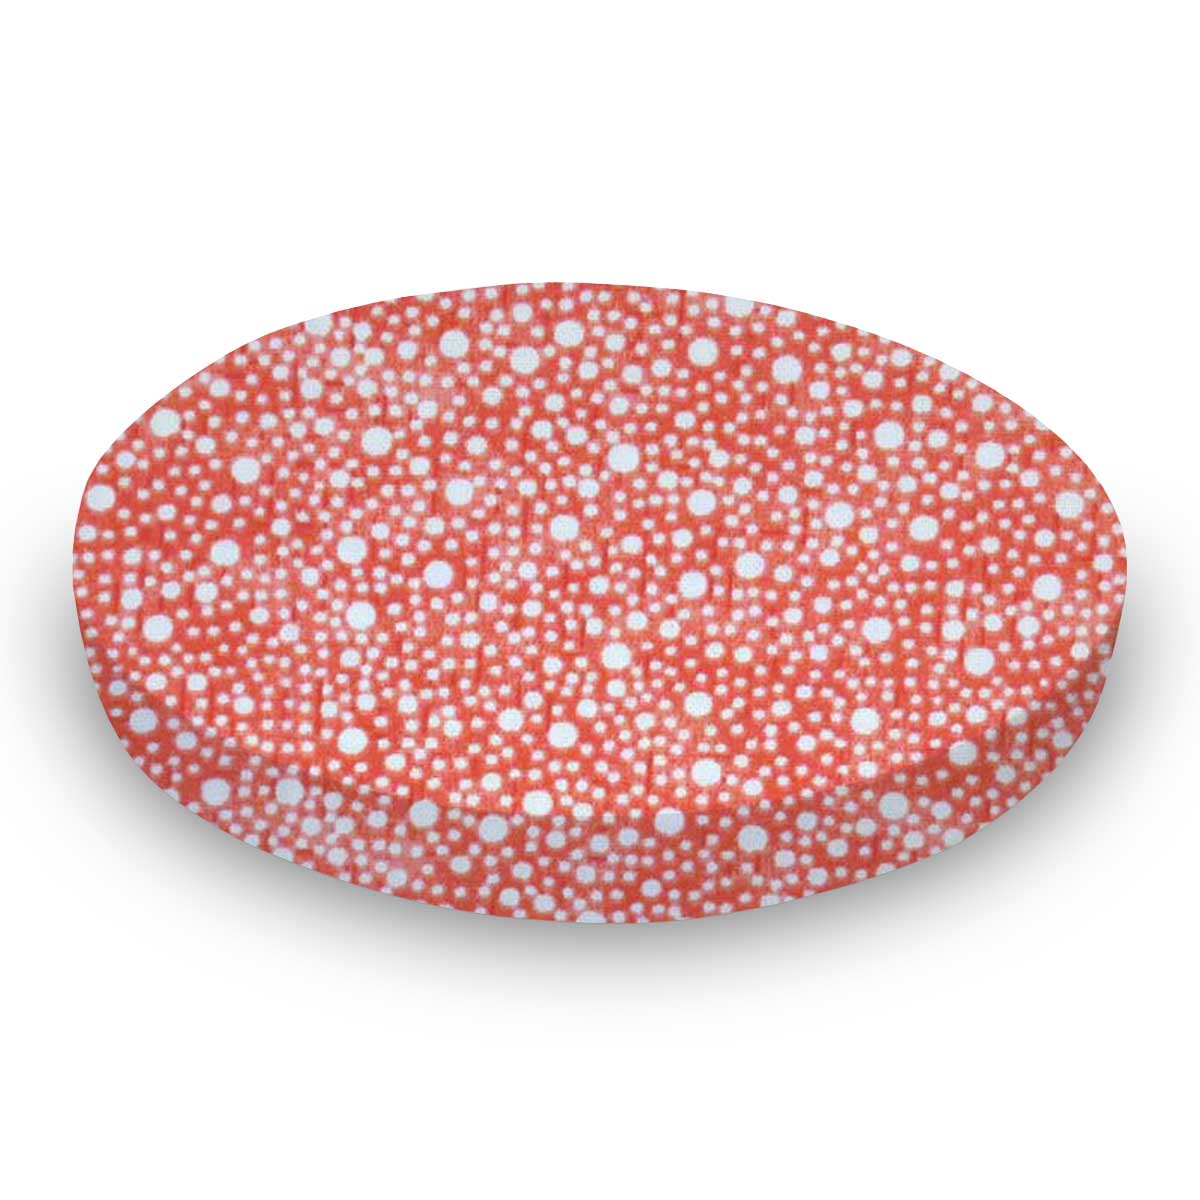 Oval Crib (Stokke Sleepi) - Confetti Dots Coral - Fitted  Oval